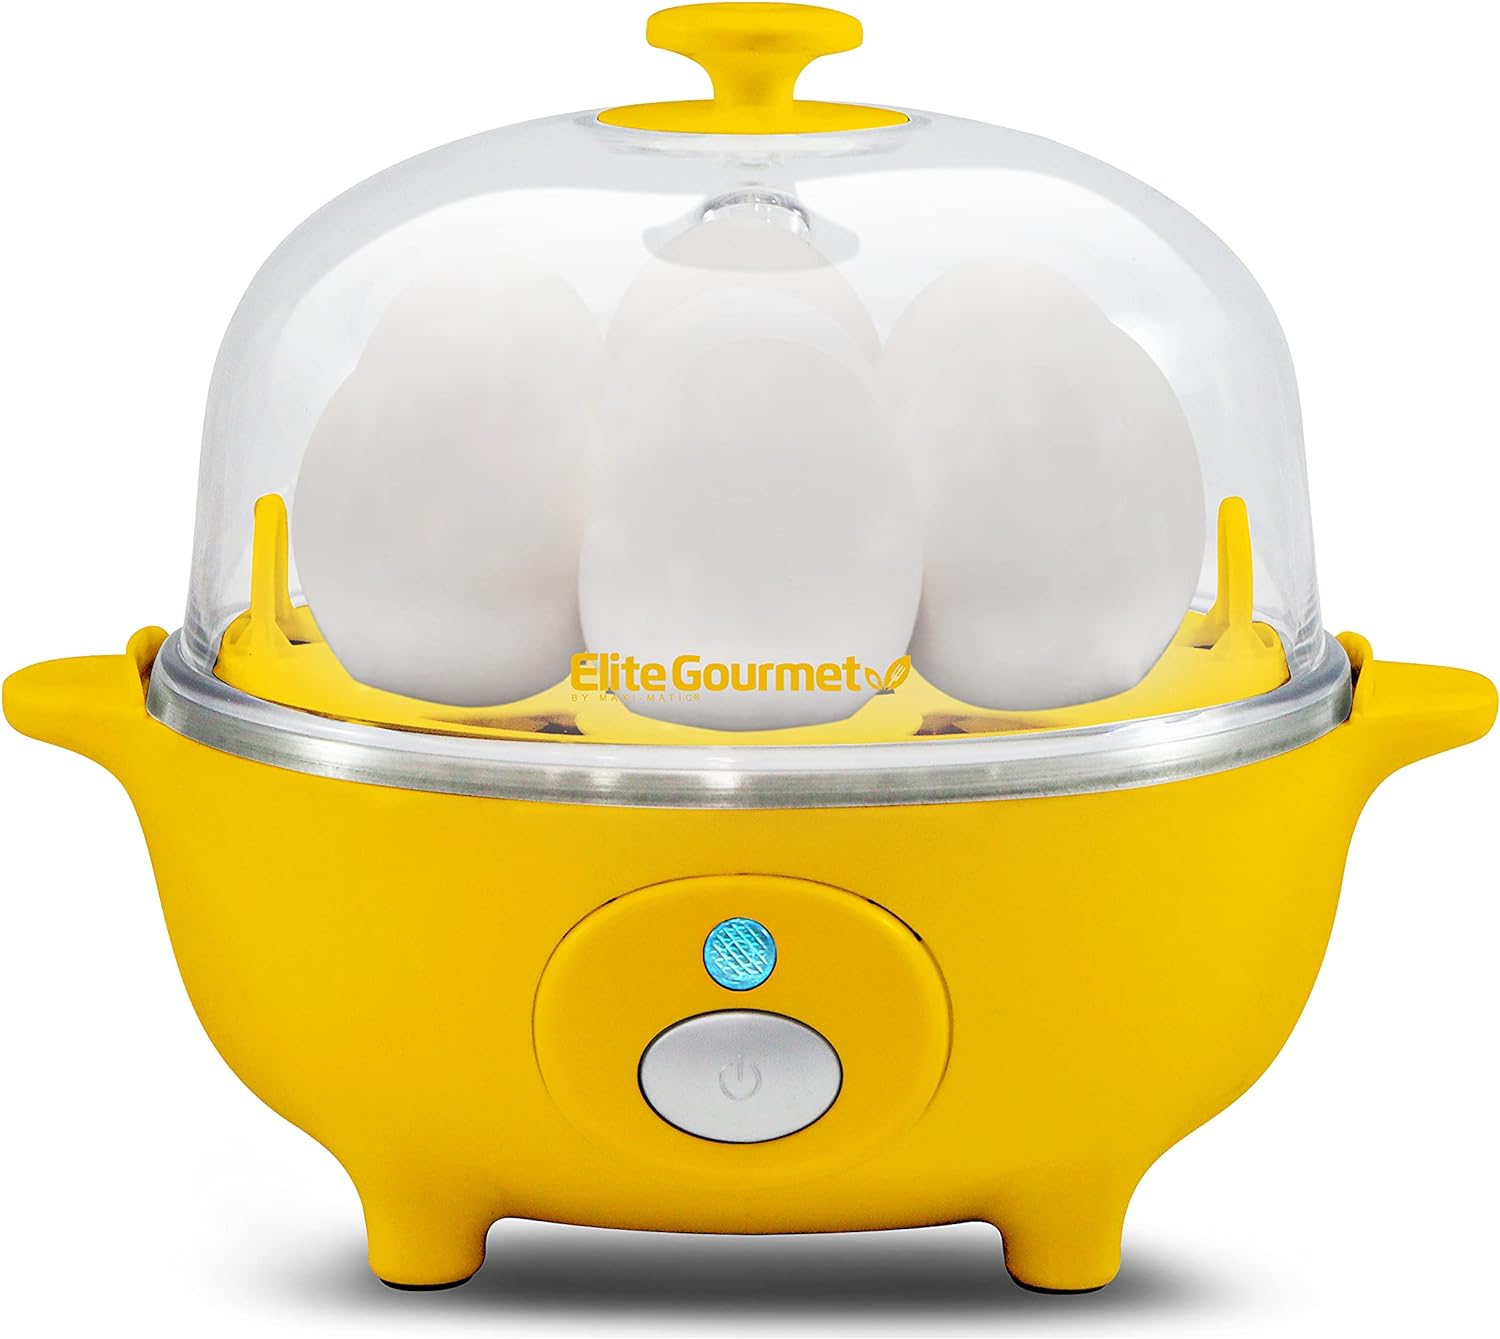 I recently added the Elite Gourmet EGC-007B# Rapid Egg Cooker to my kitchen arsenal, and it has become a morning routine game-changer. This compact and efficient egg cooker delivers perfect eggs with minimal effort.Ease of Use: 5/5The simplicity of this egg cooker is truly remarkable. With just a push of a button, I can have perfectly cooked eggs in a matter of minutes. Whether I'm in the mood for hard, medium, or soft-boiled eggs, the Elite Gourmet EGC-007B# handles it all effortlessly.Versatil